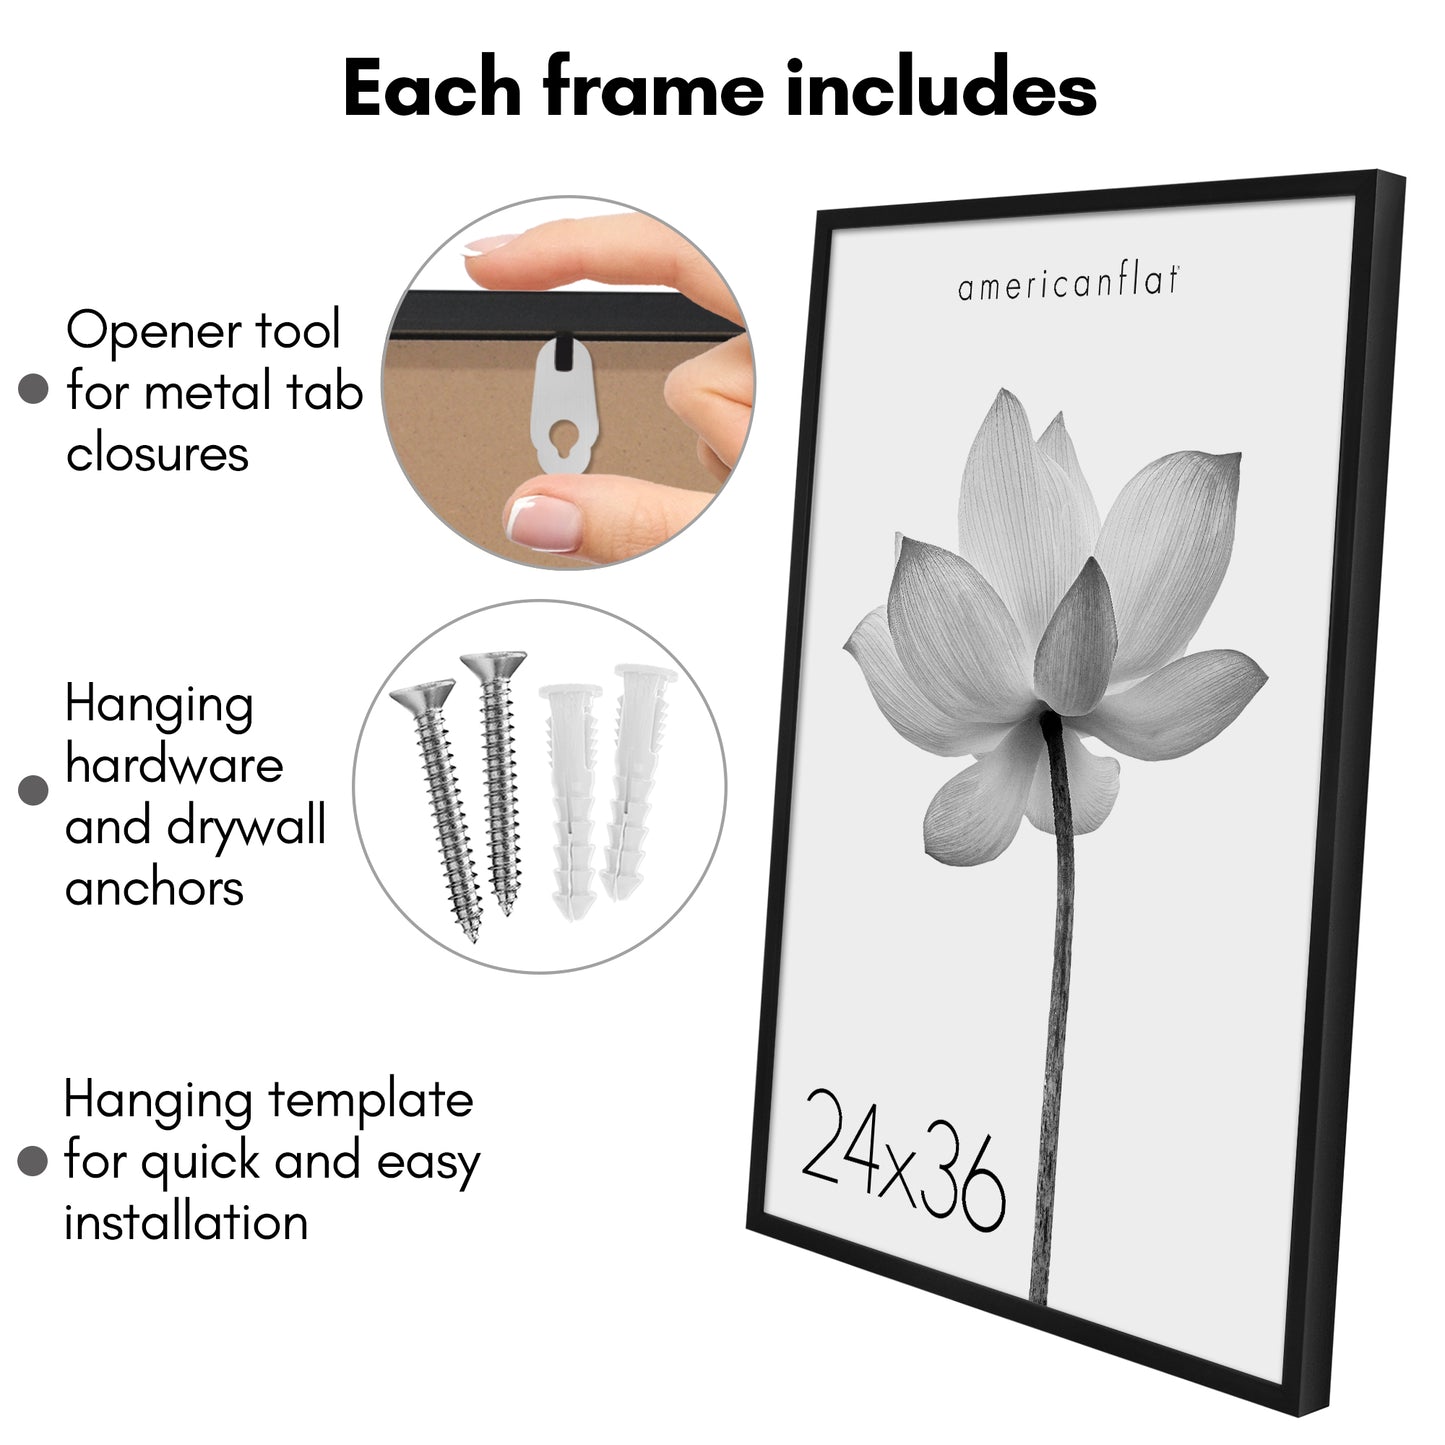 Deep Molding Frame without Mat | Choose Size and Color